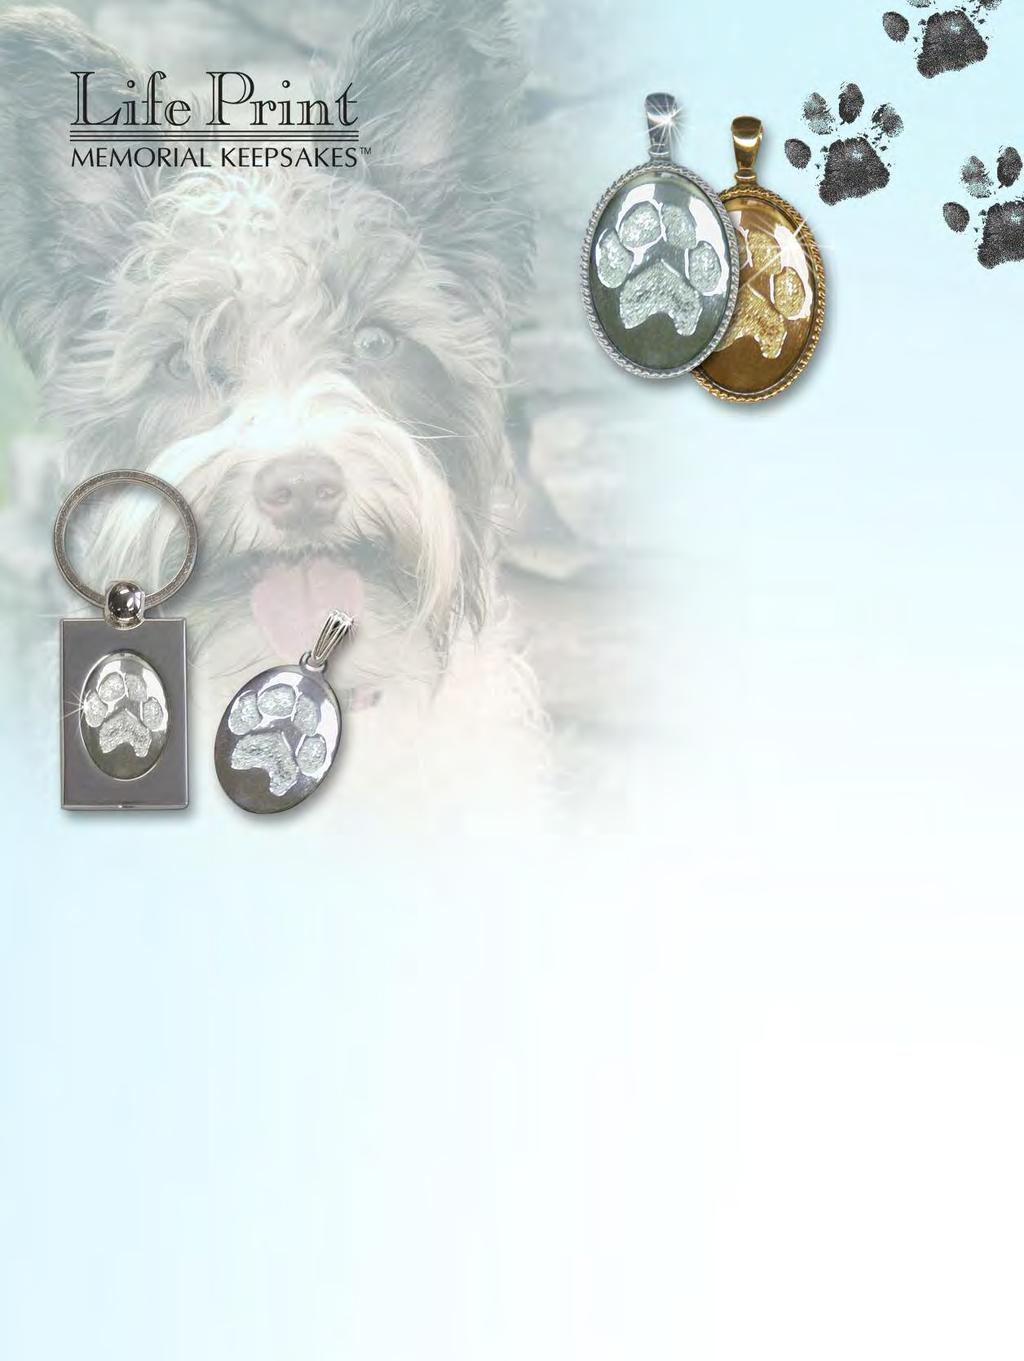 Made in USA Life Print Keepsakes are created by using a combination of traditional jewelry techniques, modern technology and your pet s pawprint.